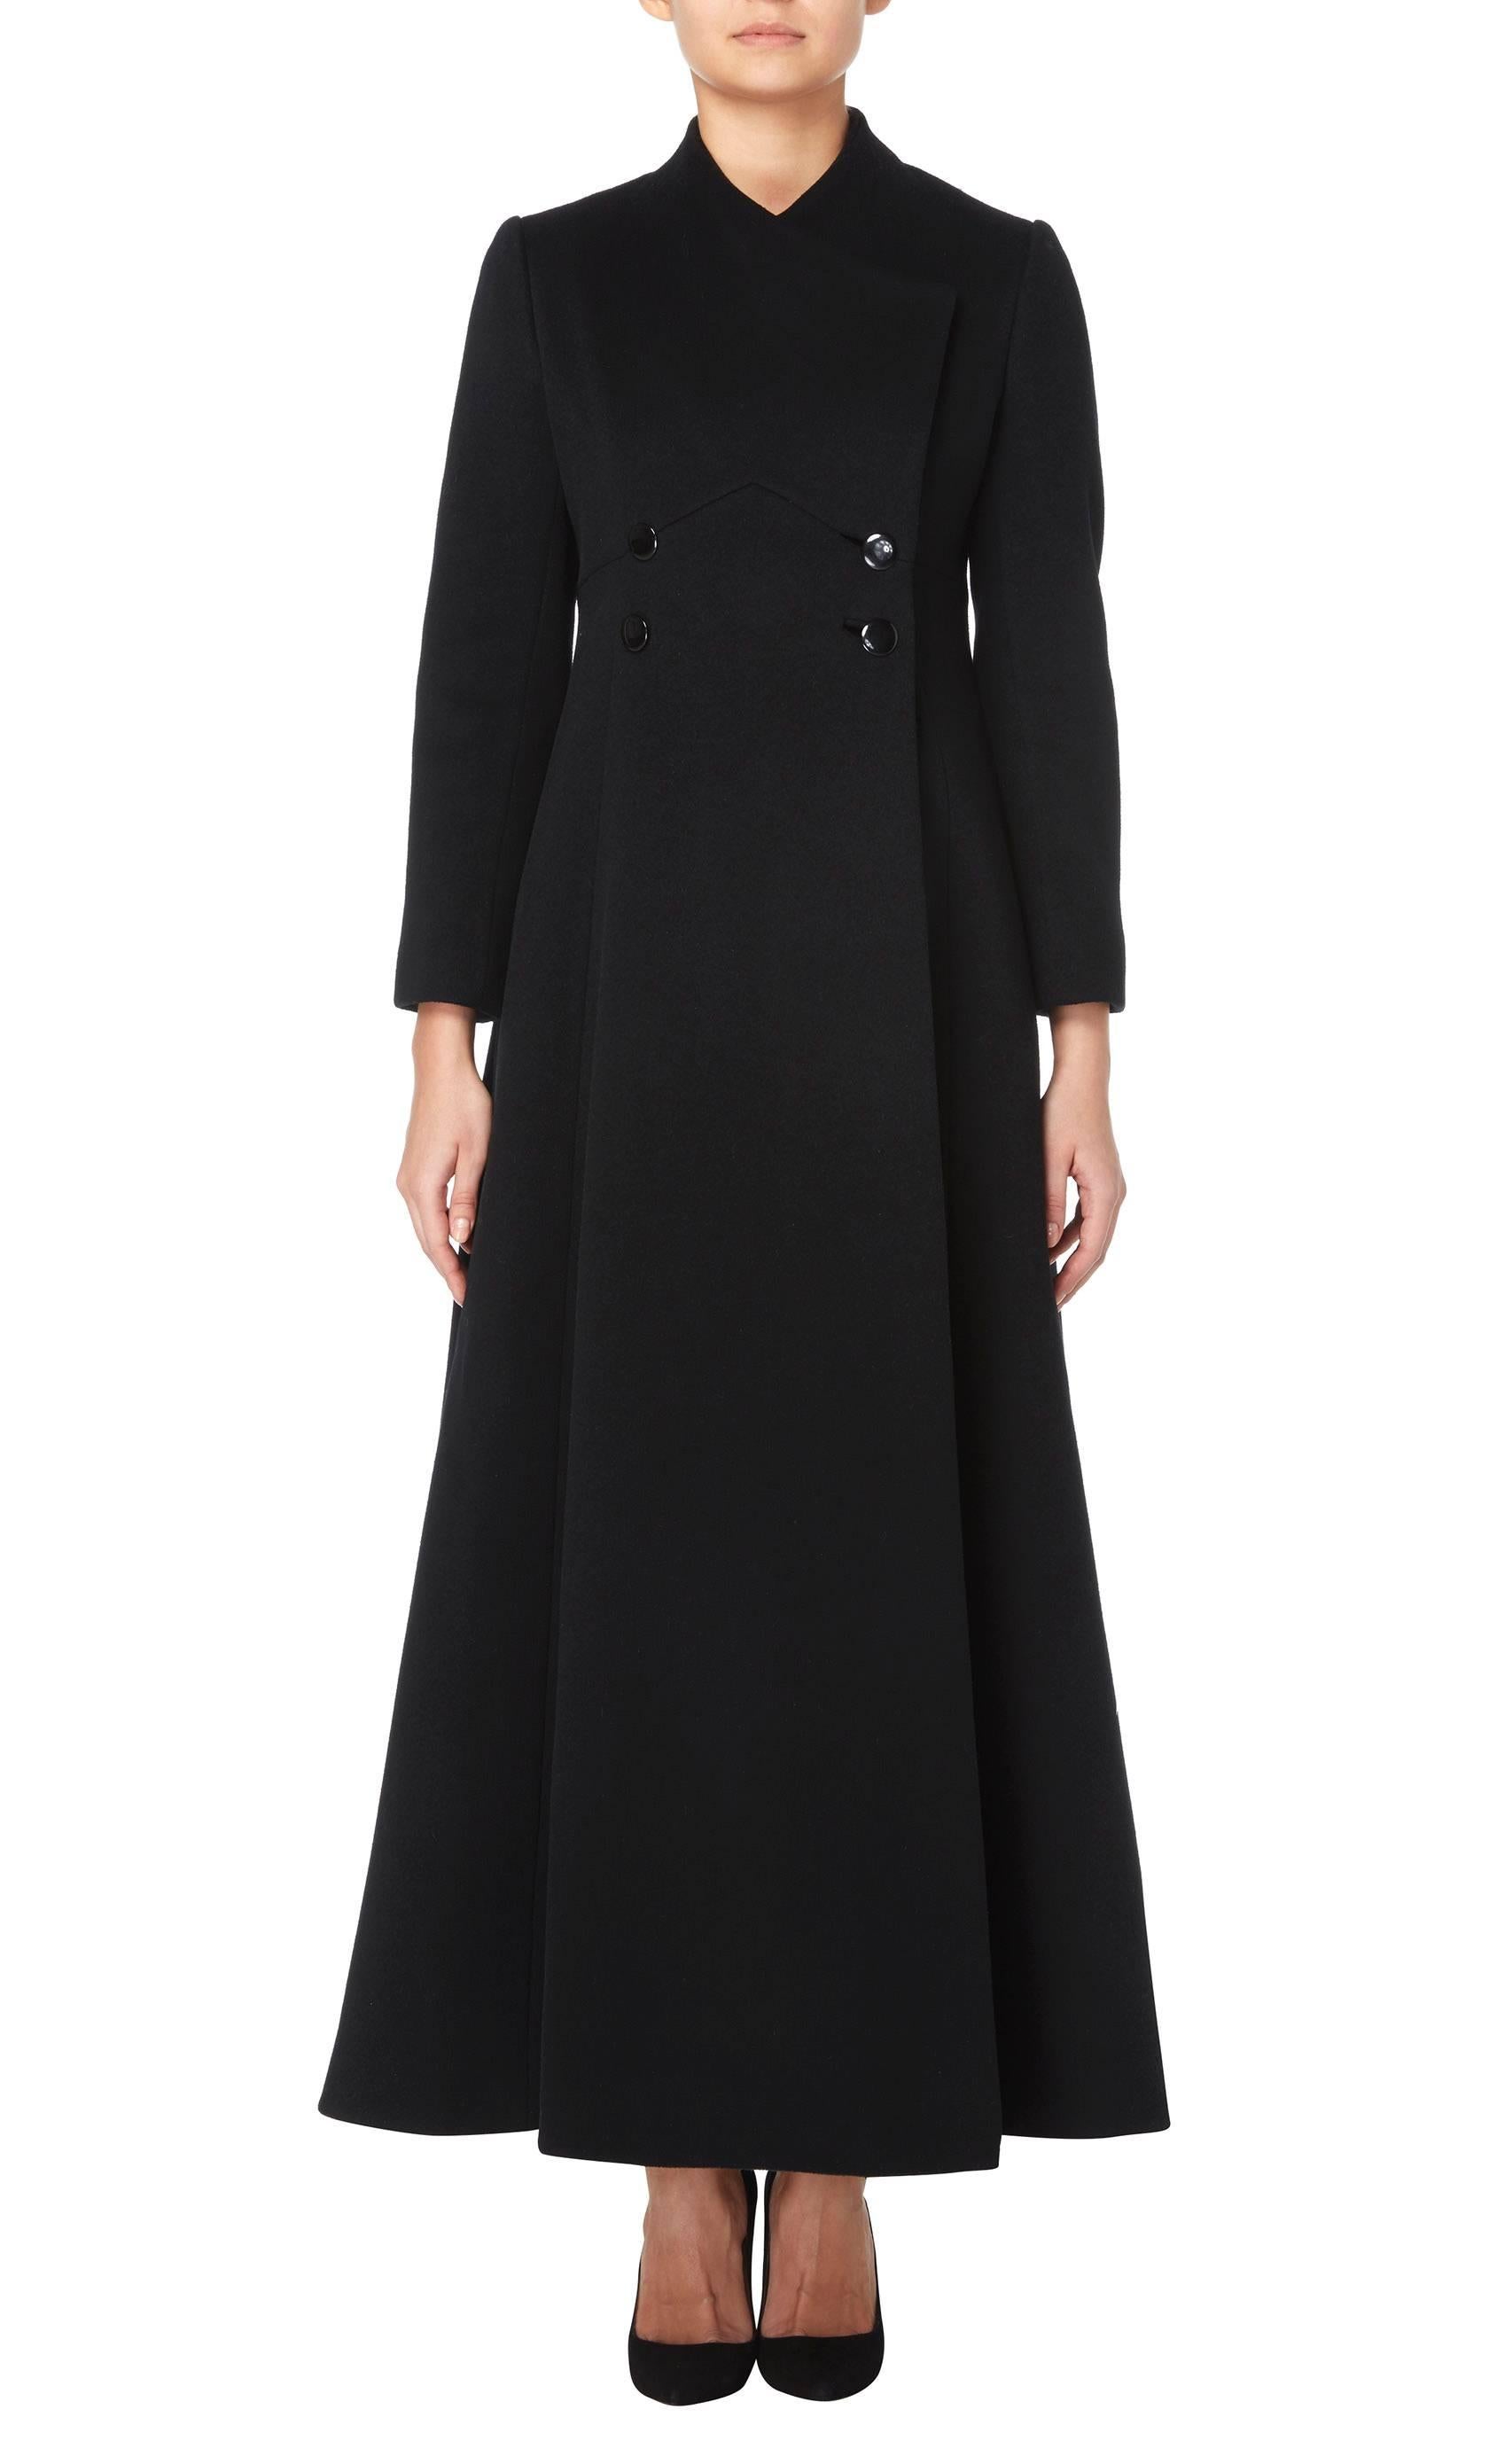 A chic and dramatic floor-length coat in black wool, with double-breasted detail and a distinct A-line shape. Perfect for day, night or anything in between.

Constructed in black wool
Double-breasted with hidden pockets on the hip
Buttons